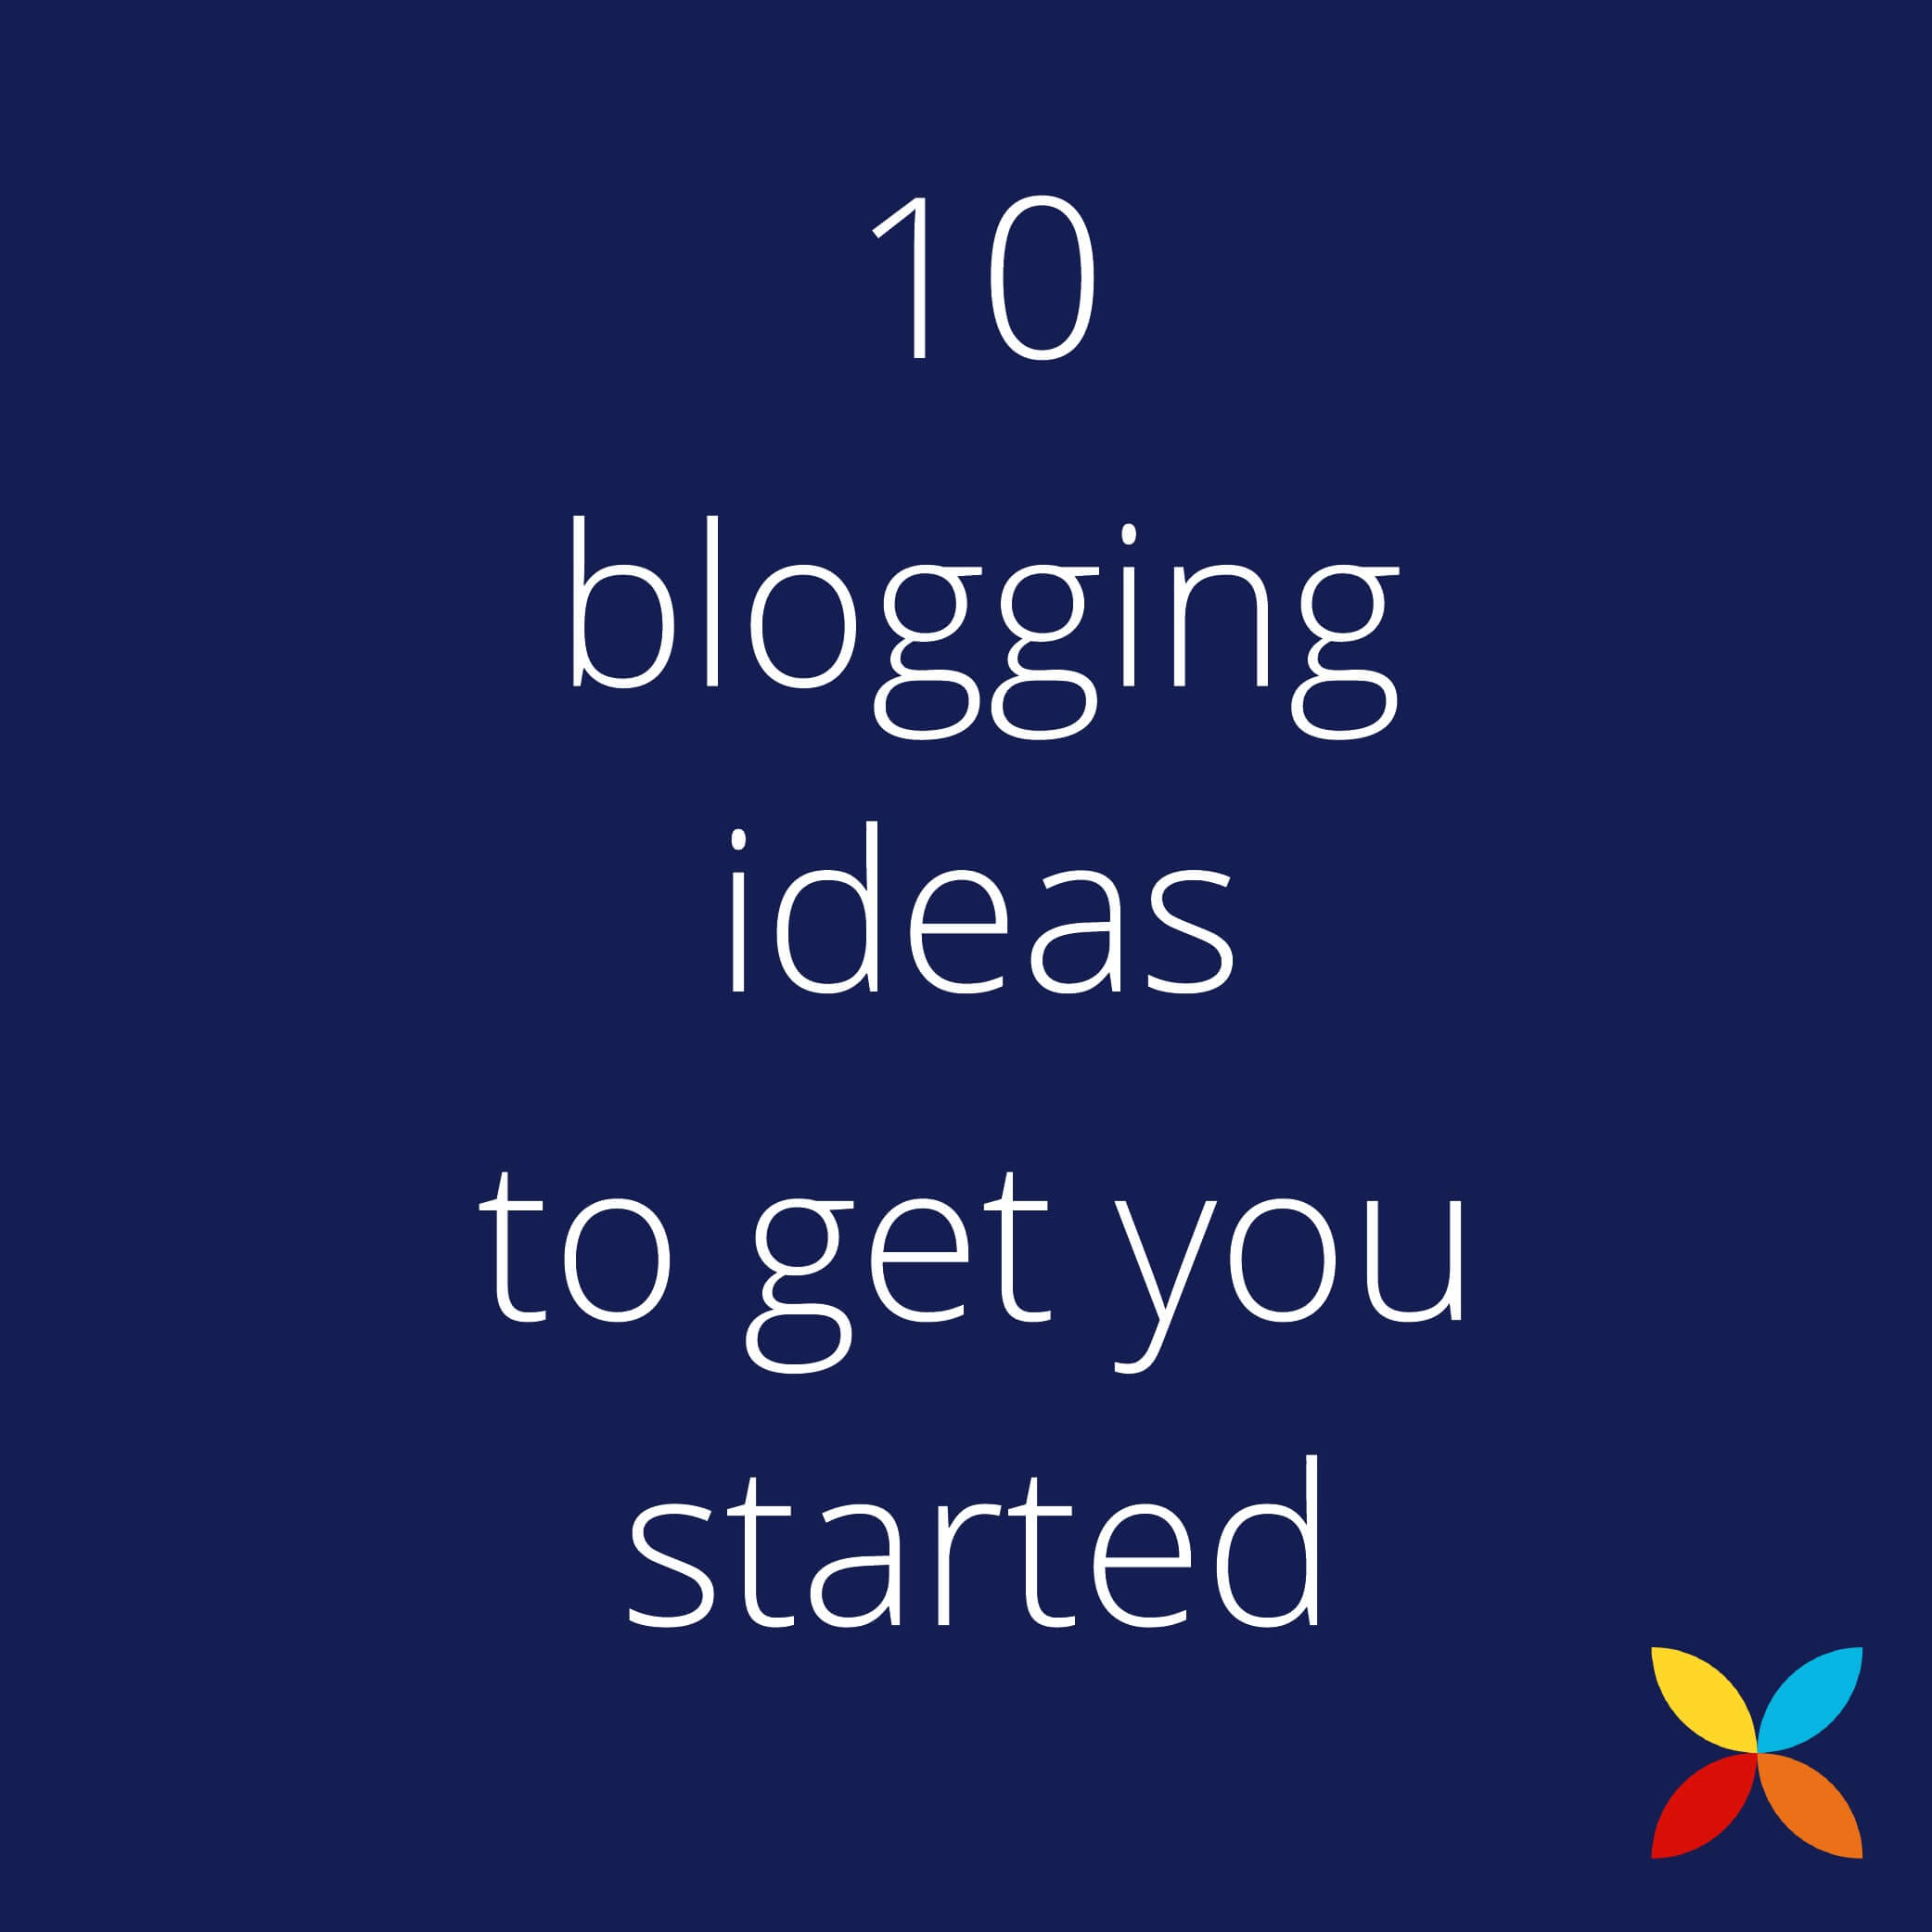 10 Blogging Ideas to get you started